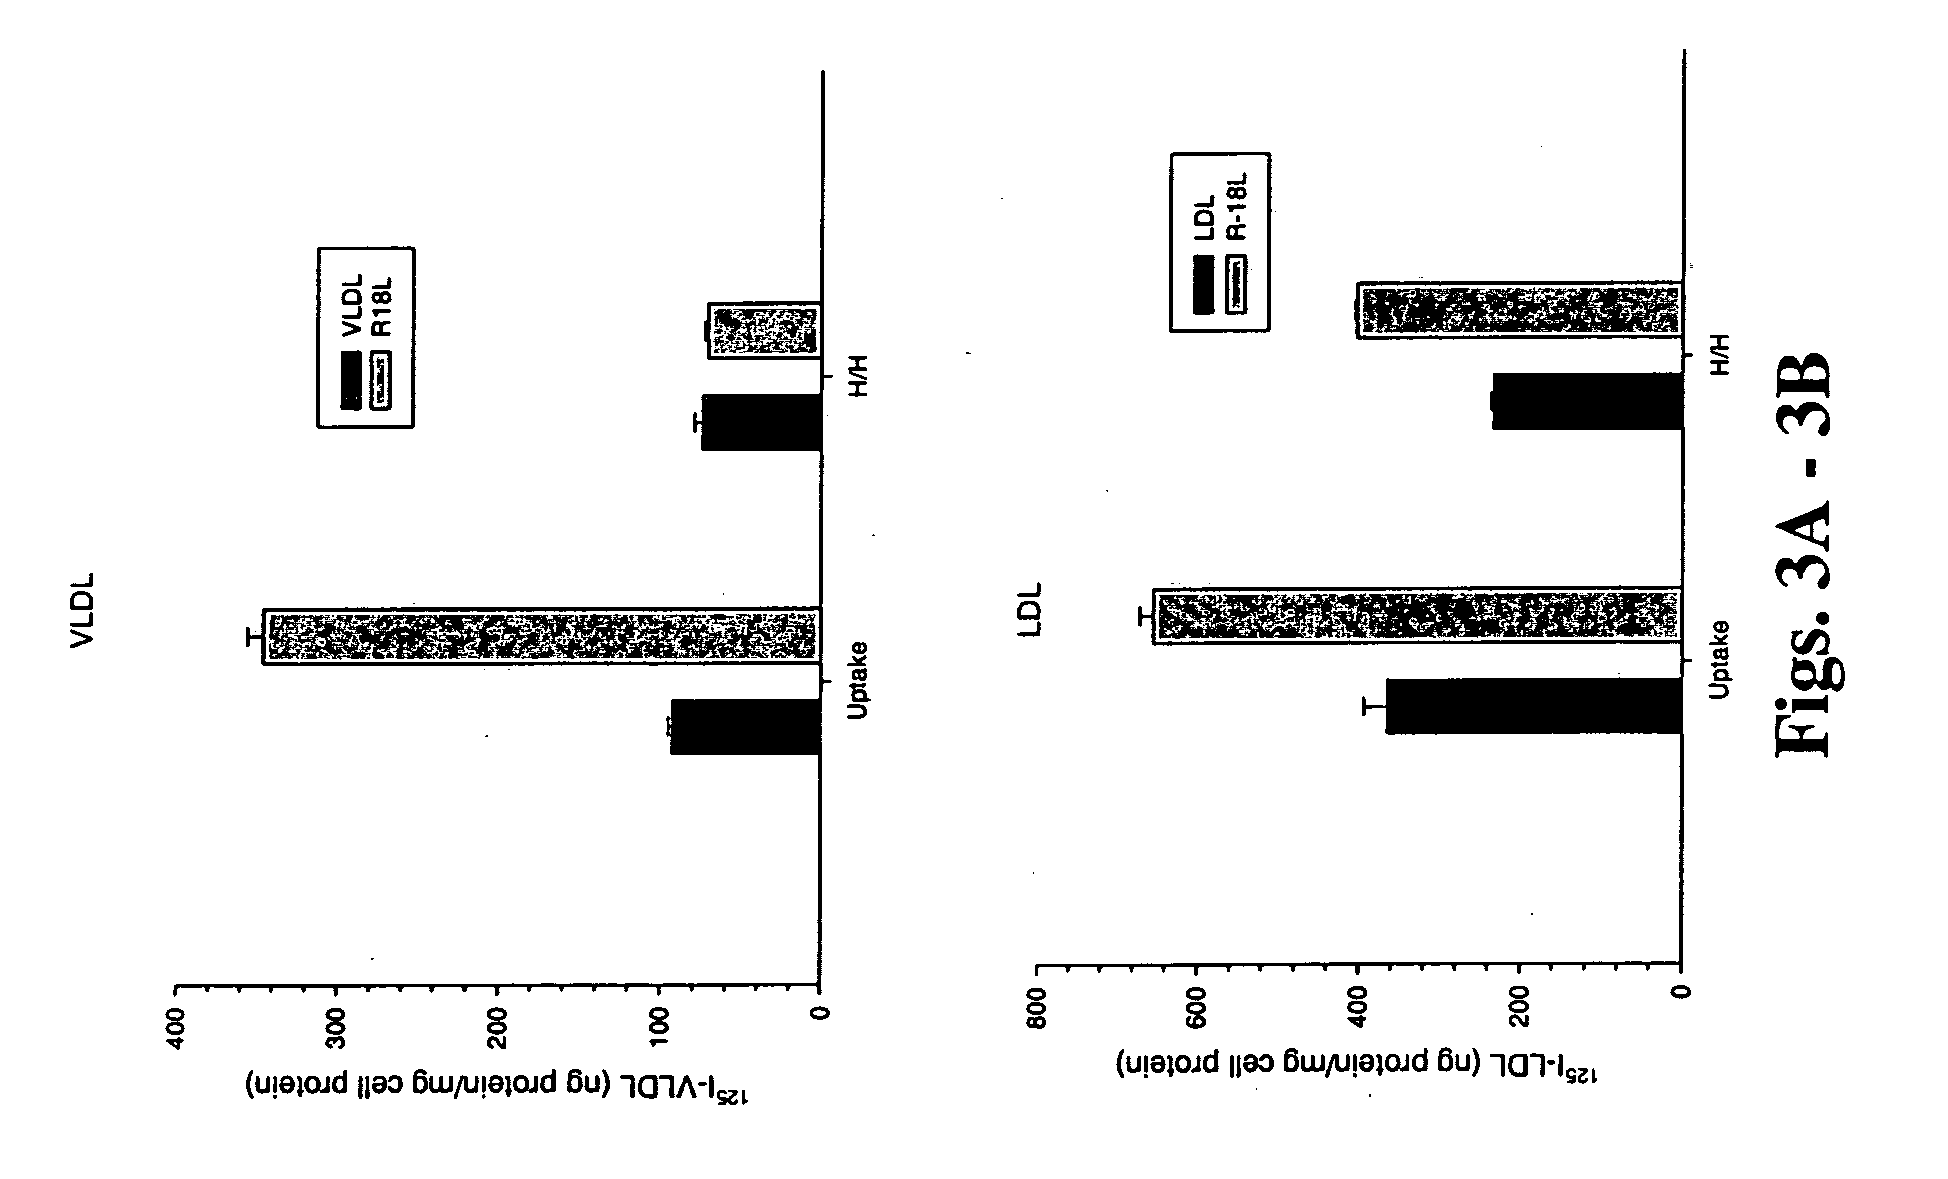 Synthetic single domain polypeptides mimicking apolipoprotein E and methods of use